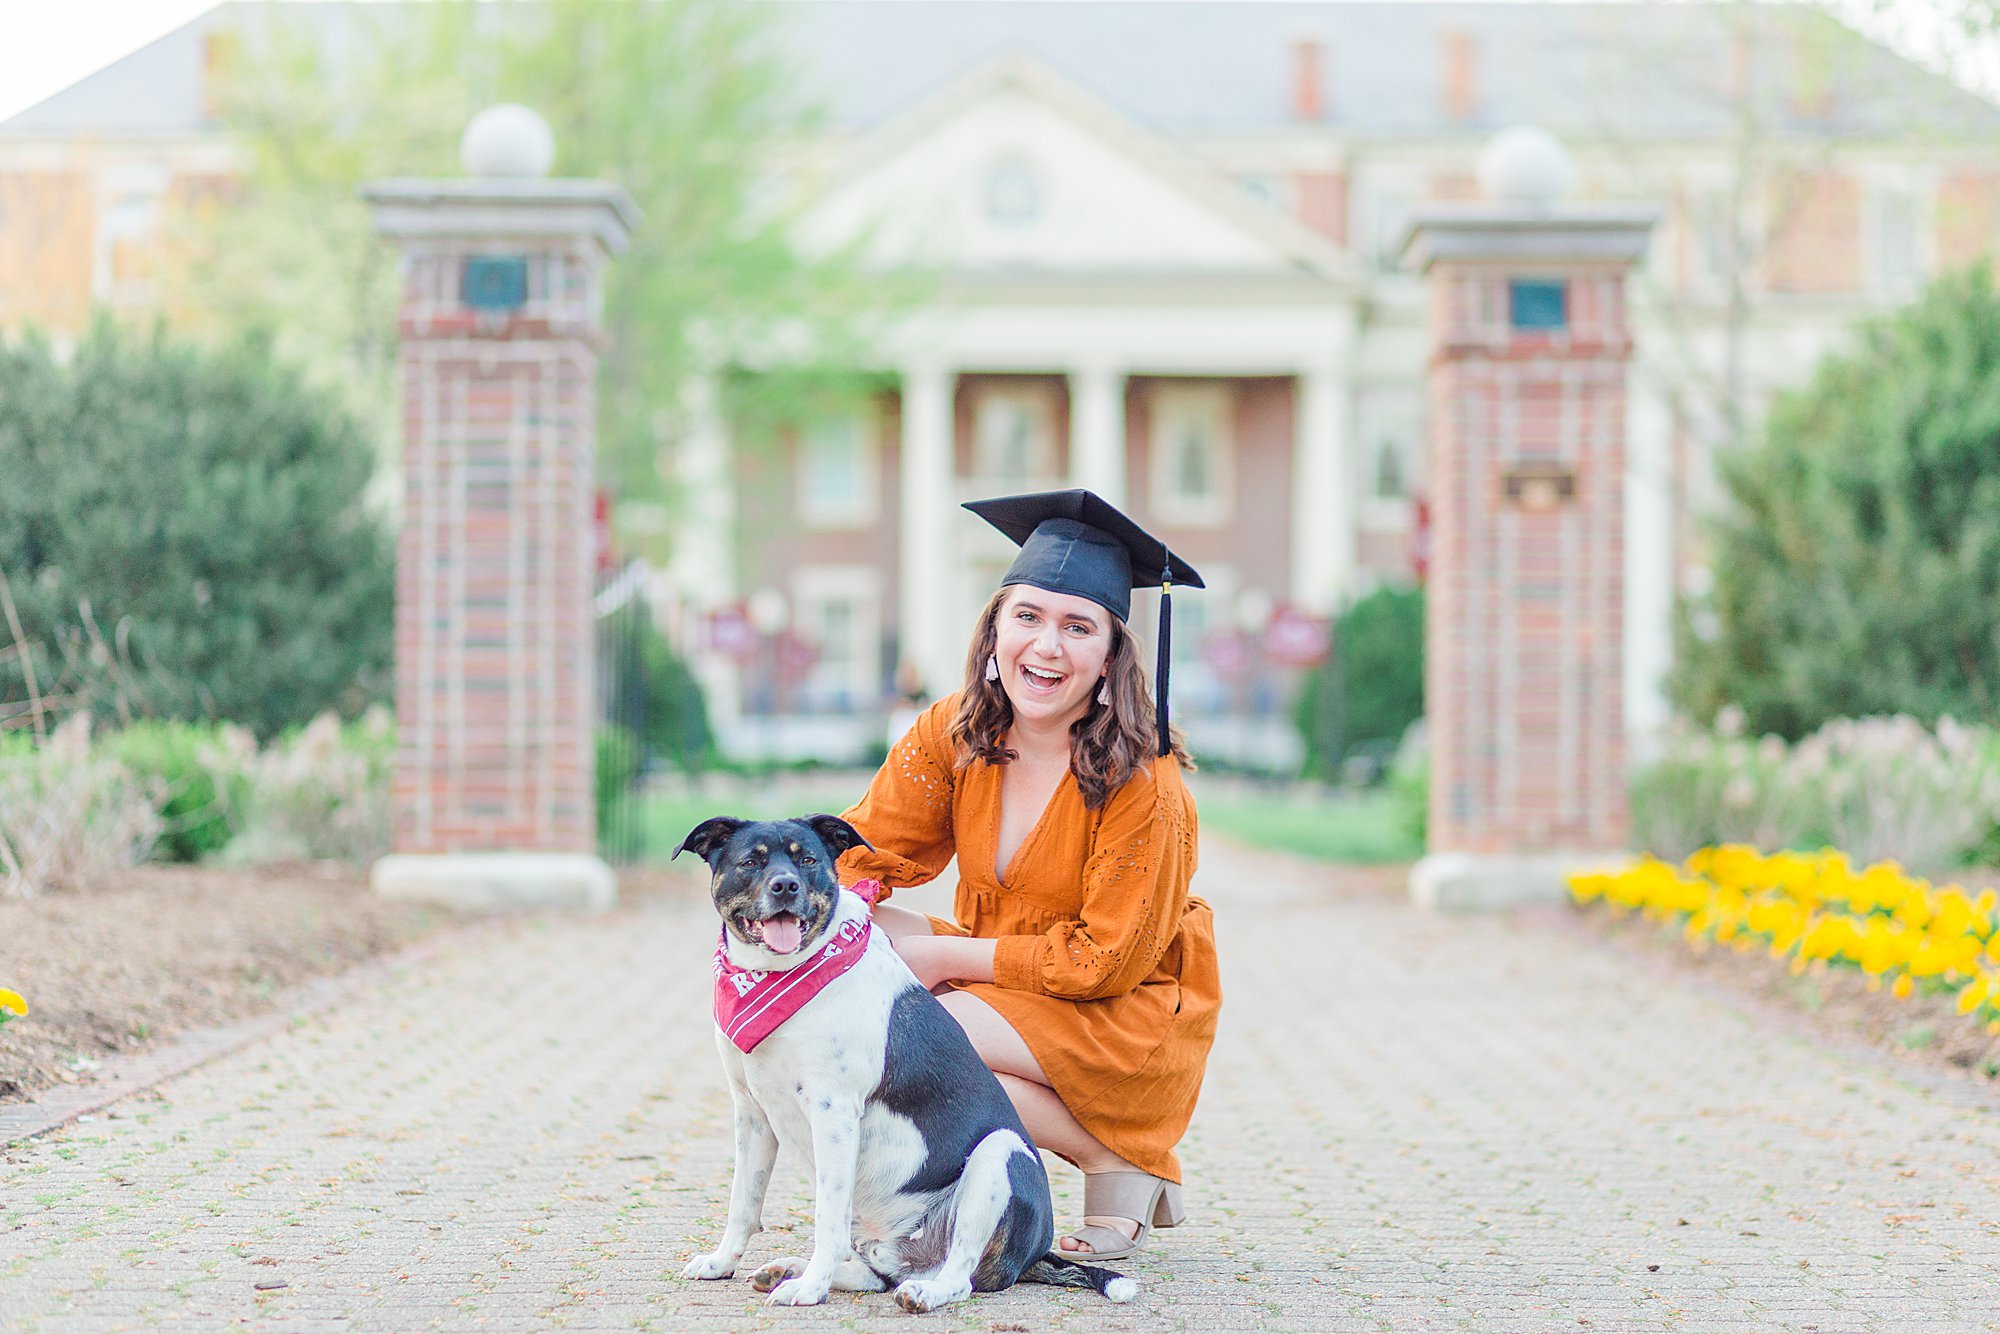 Girl posing with dog for graduation picture.